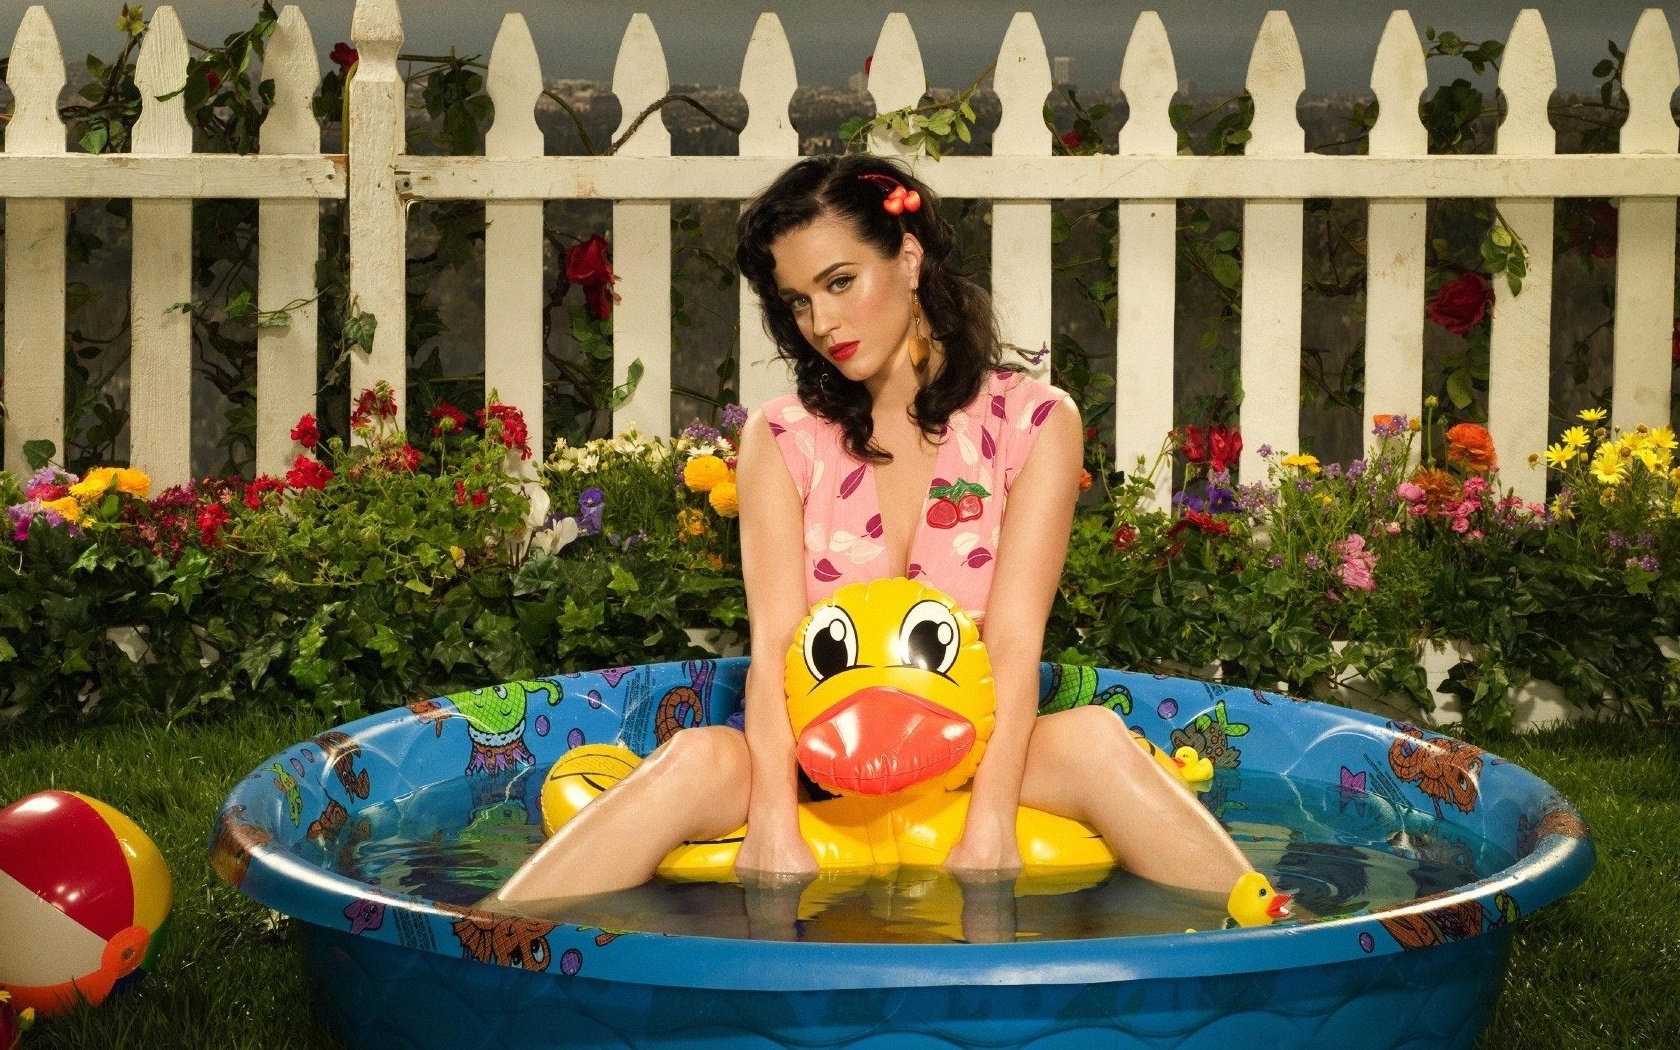 Download High quality Katy Perry wallpaper / Celebrities Female / 1680x1050